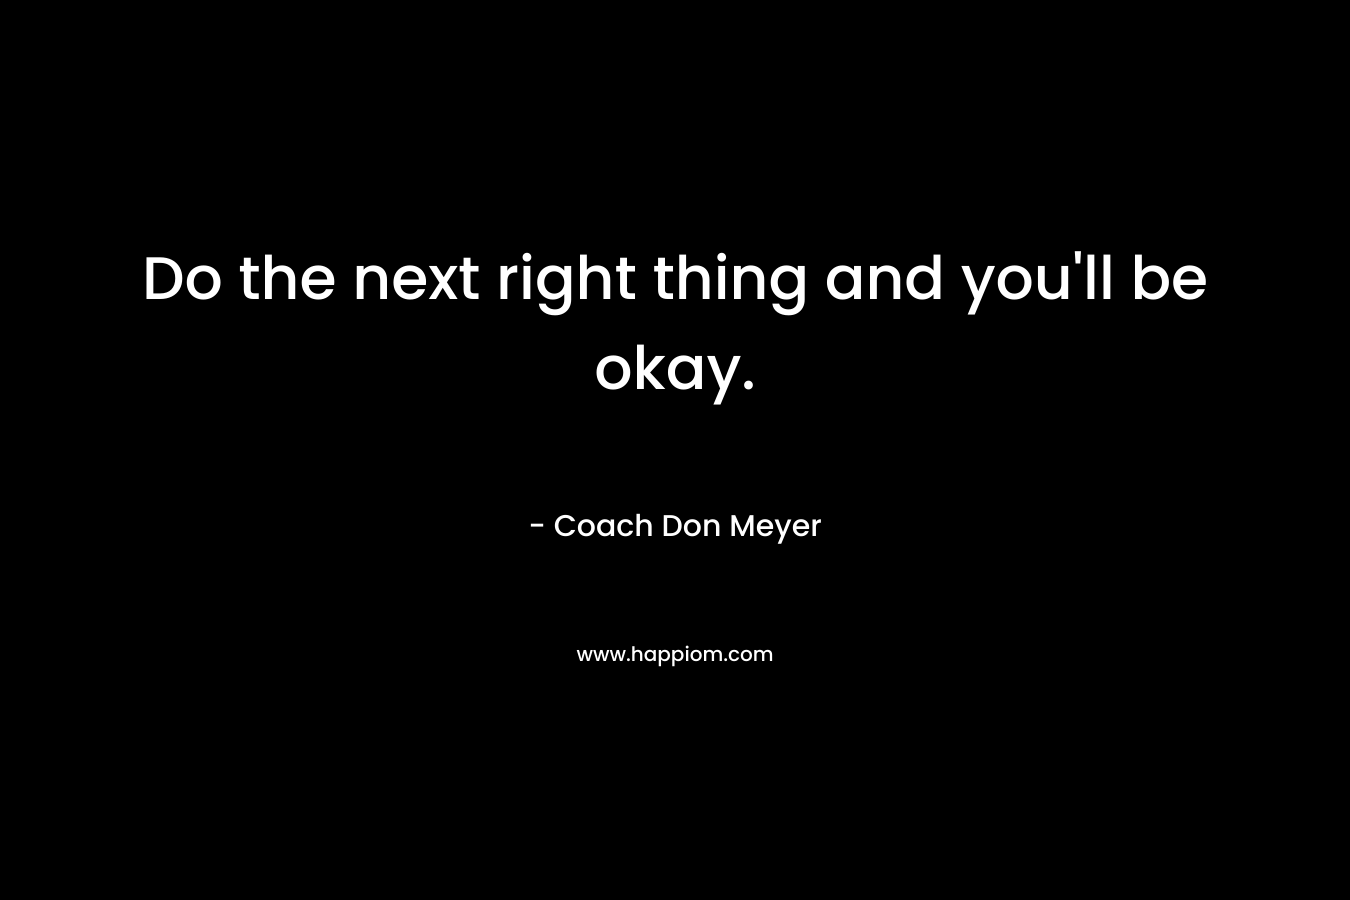 Do the next right thing and you'll be okay.